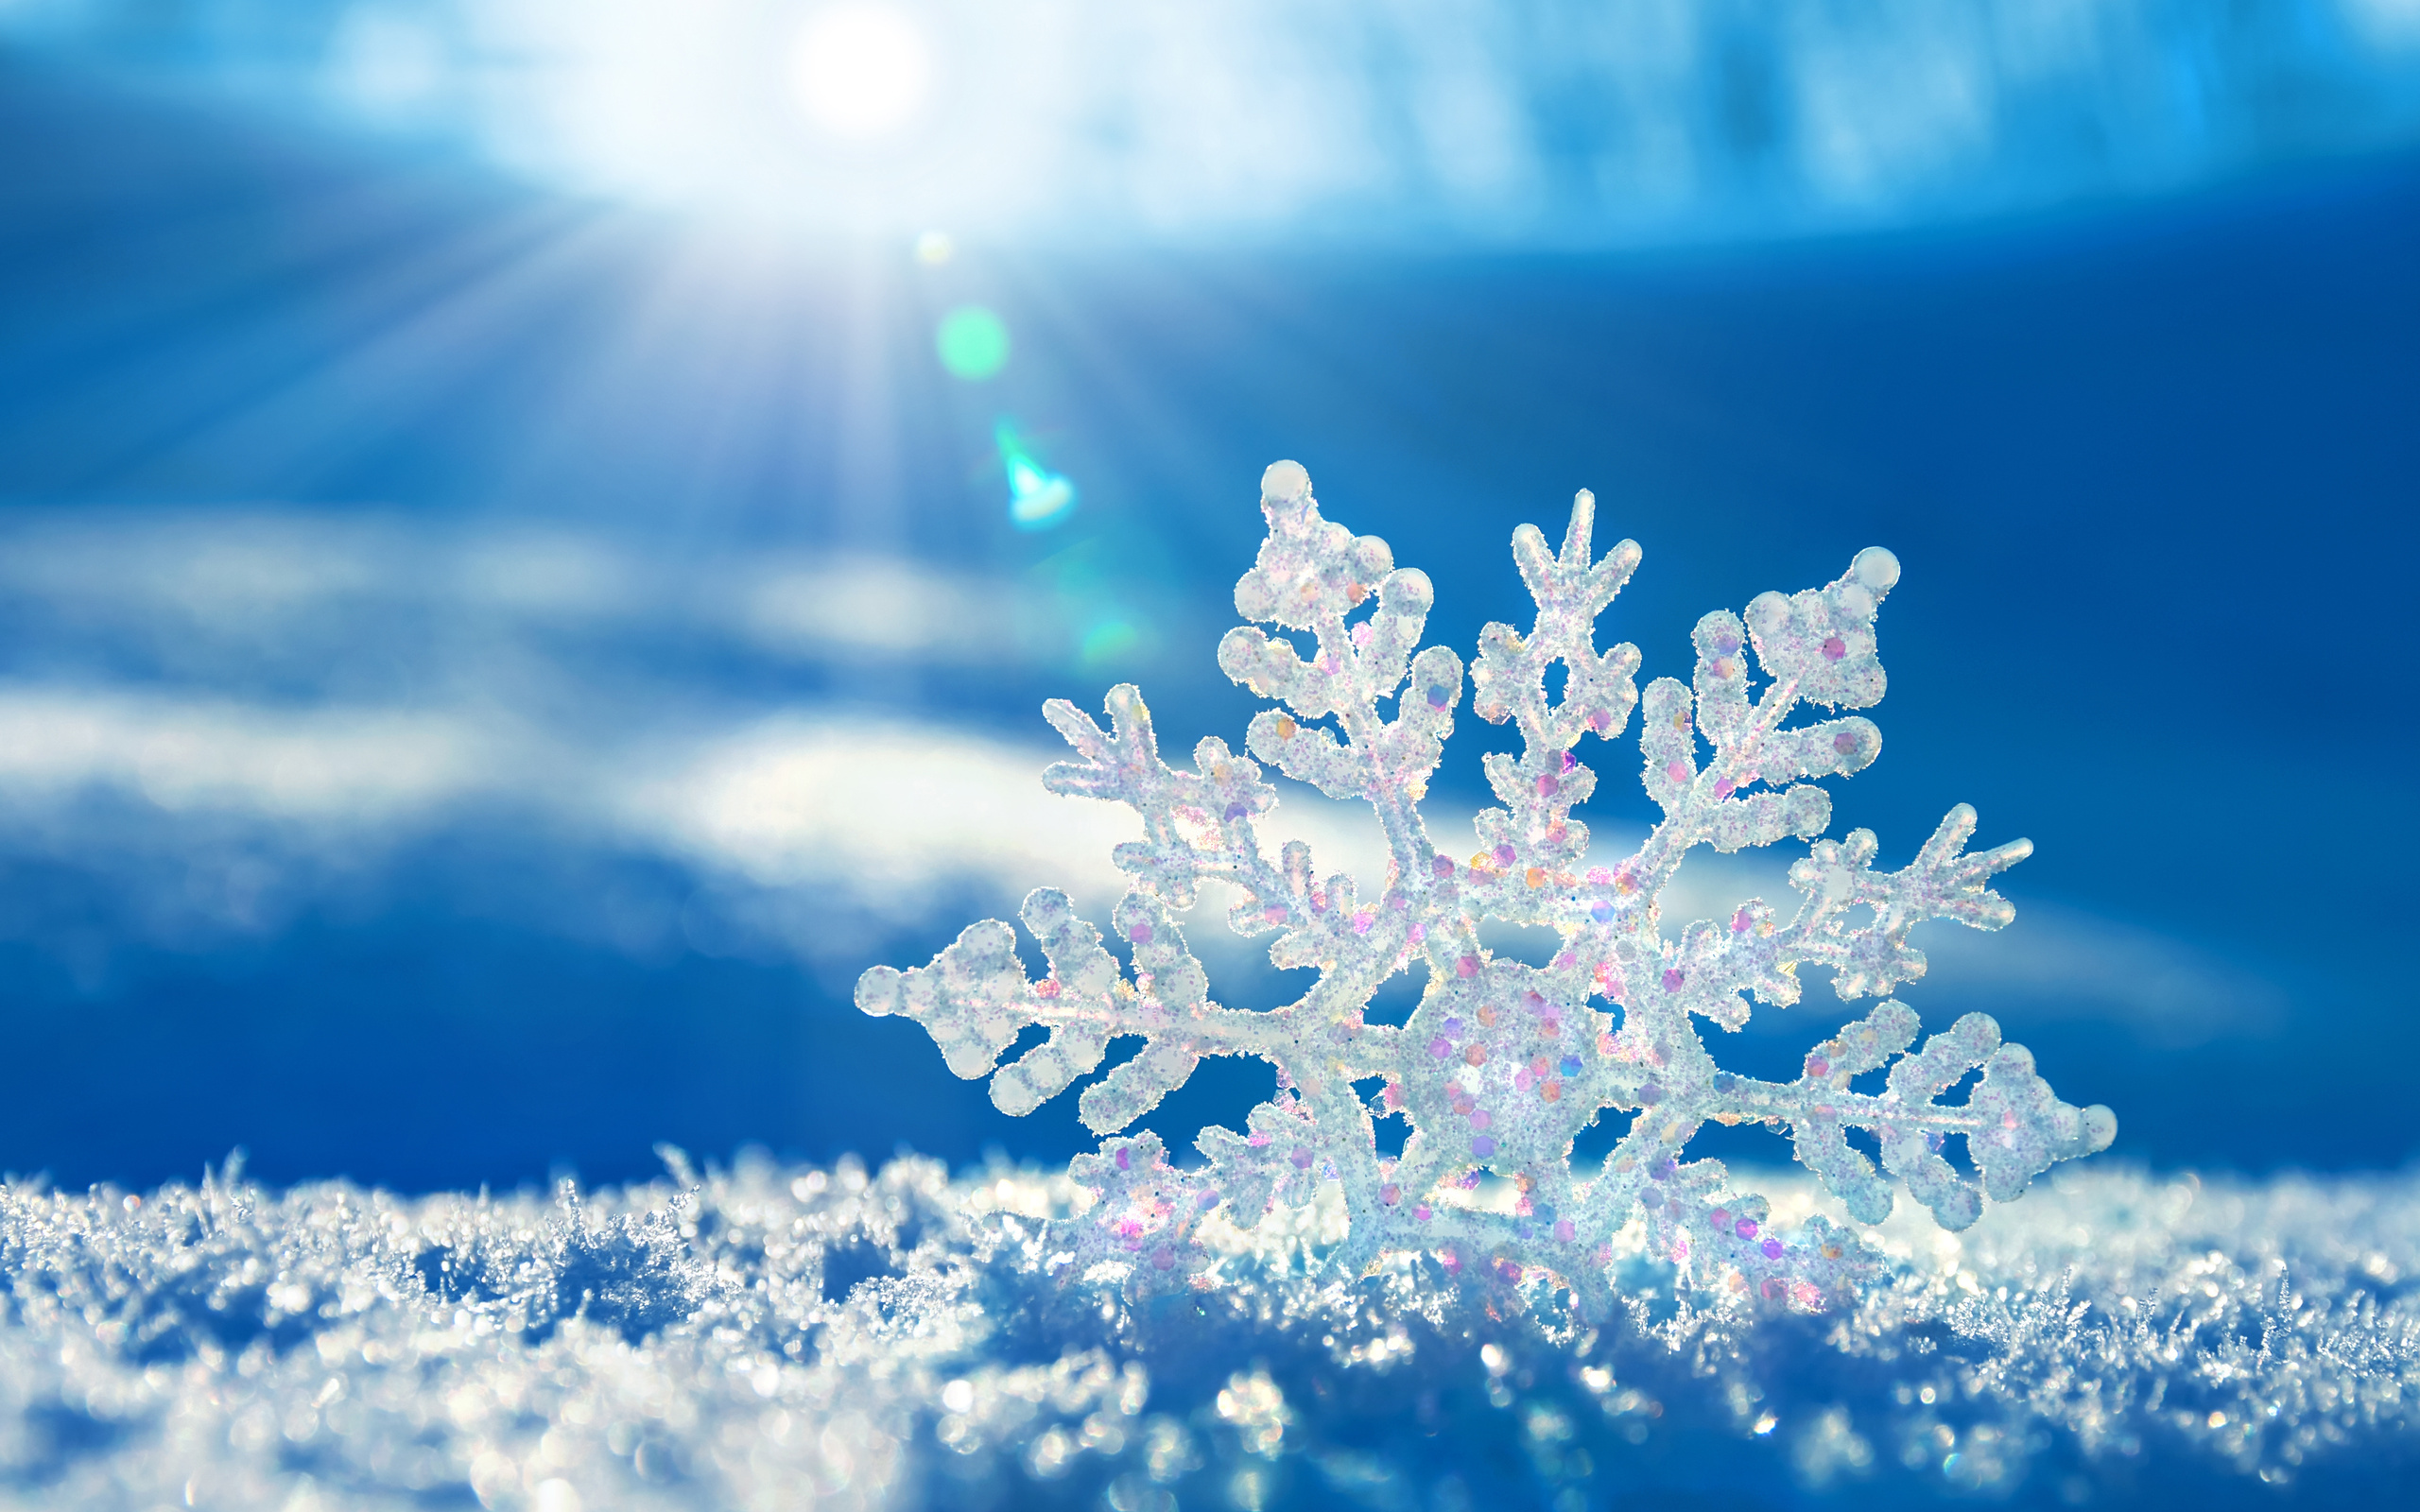 33757 1280x1024 PC pictures for free, download blue, background, snowflakes 1280x1024 wallpapers on your desktop